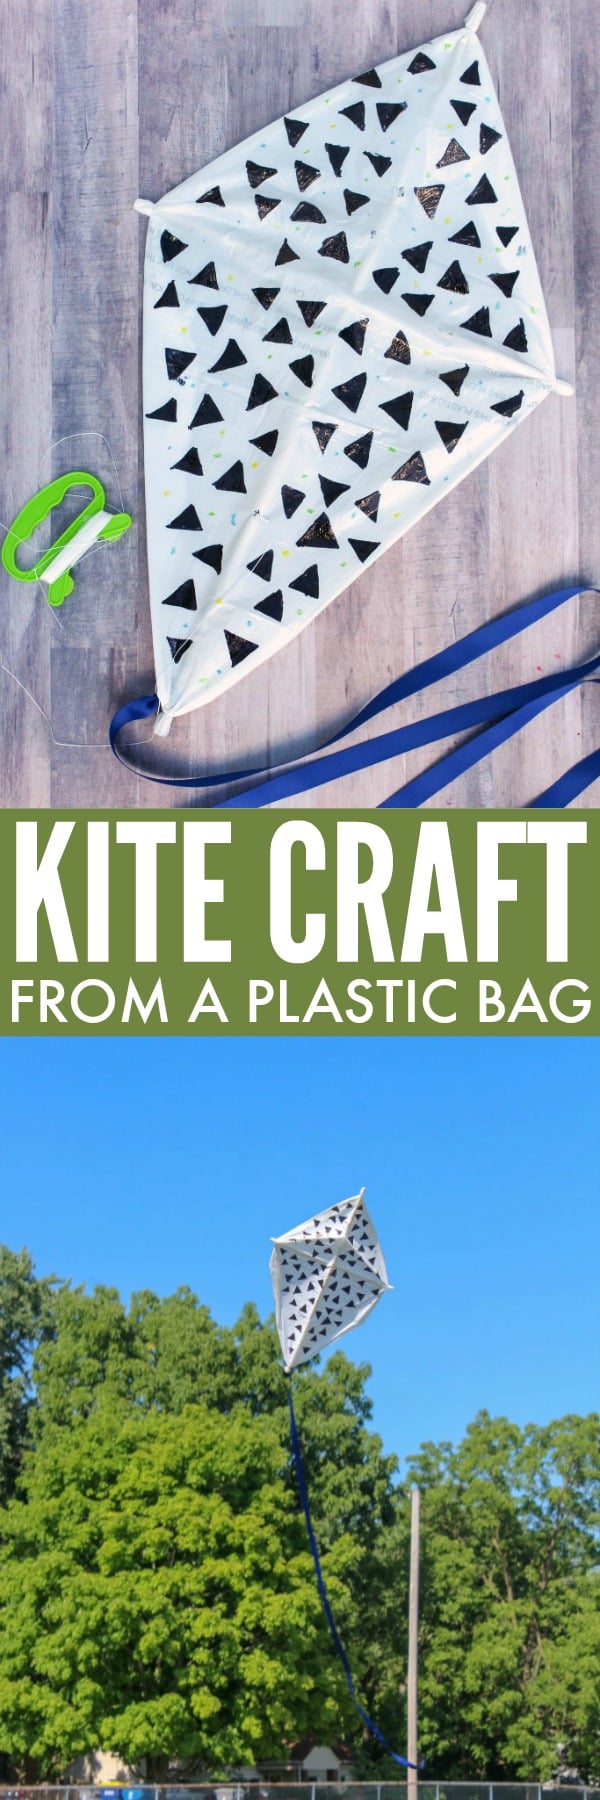 Fun Craft and Activity for Summer: Kite Craft from a Trash Bag!